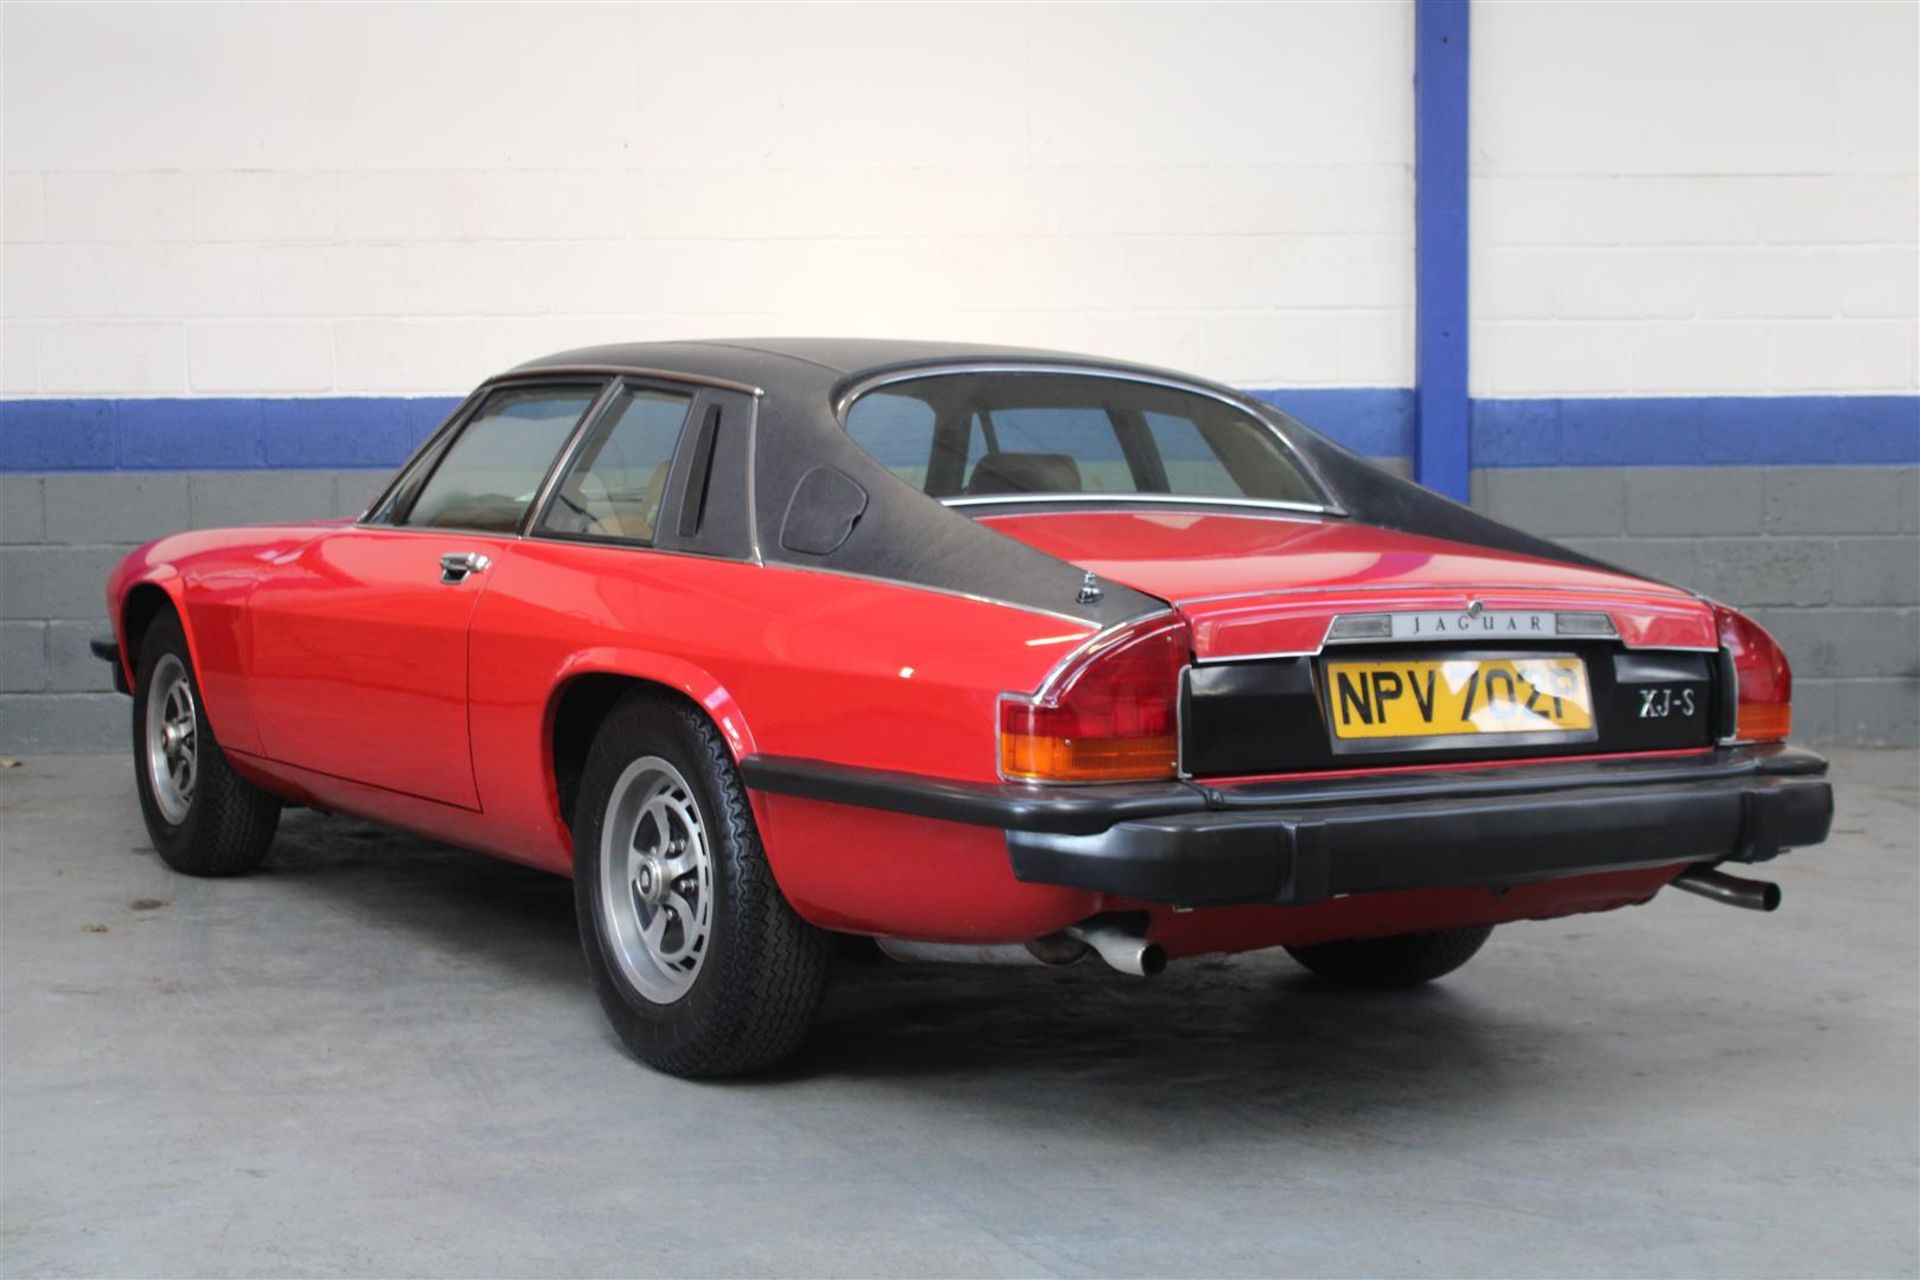 1976 Jaguar XJ-S 5.3 V12 Coupe Auto 29,030 miles from new - Image 17 of 23